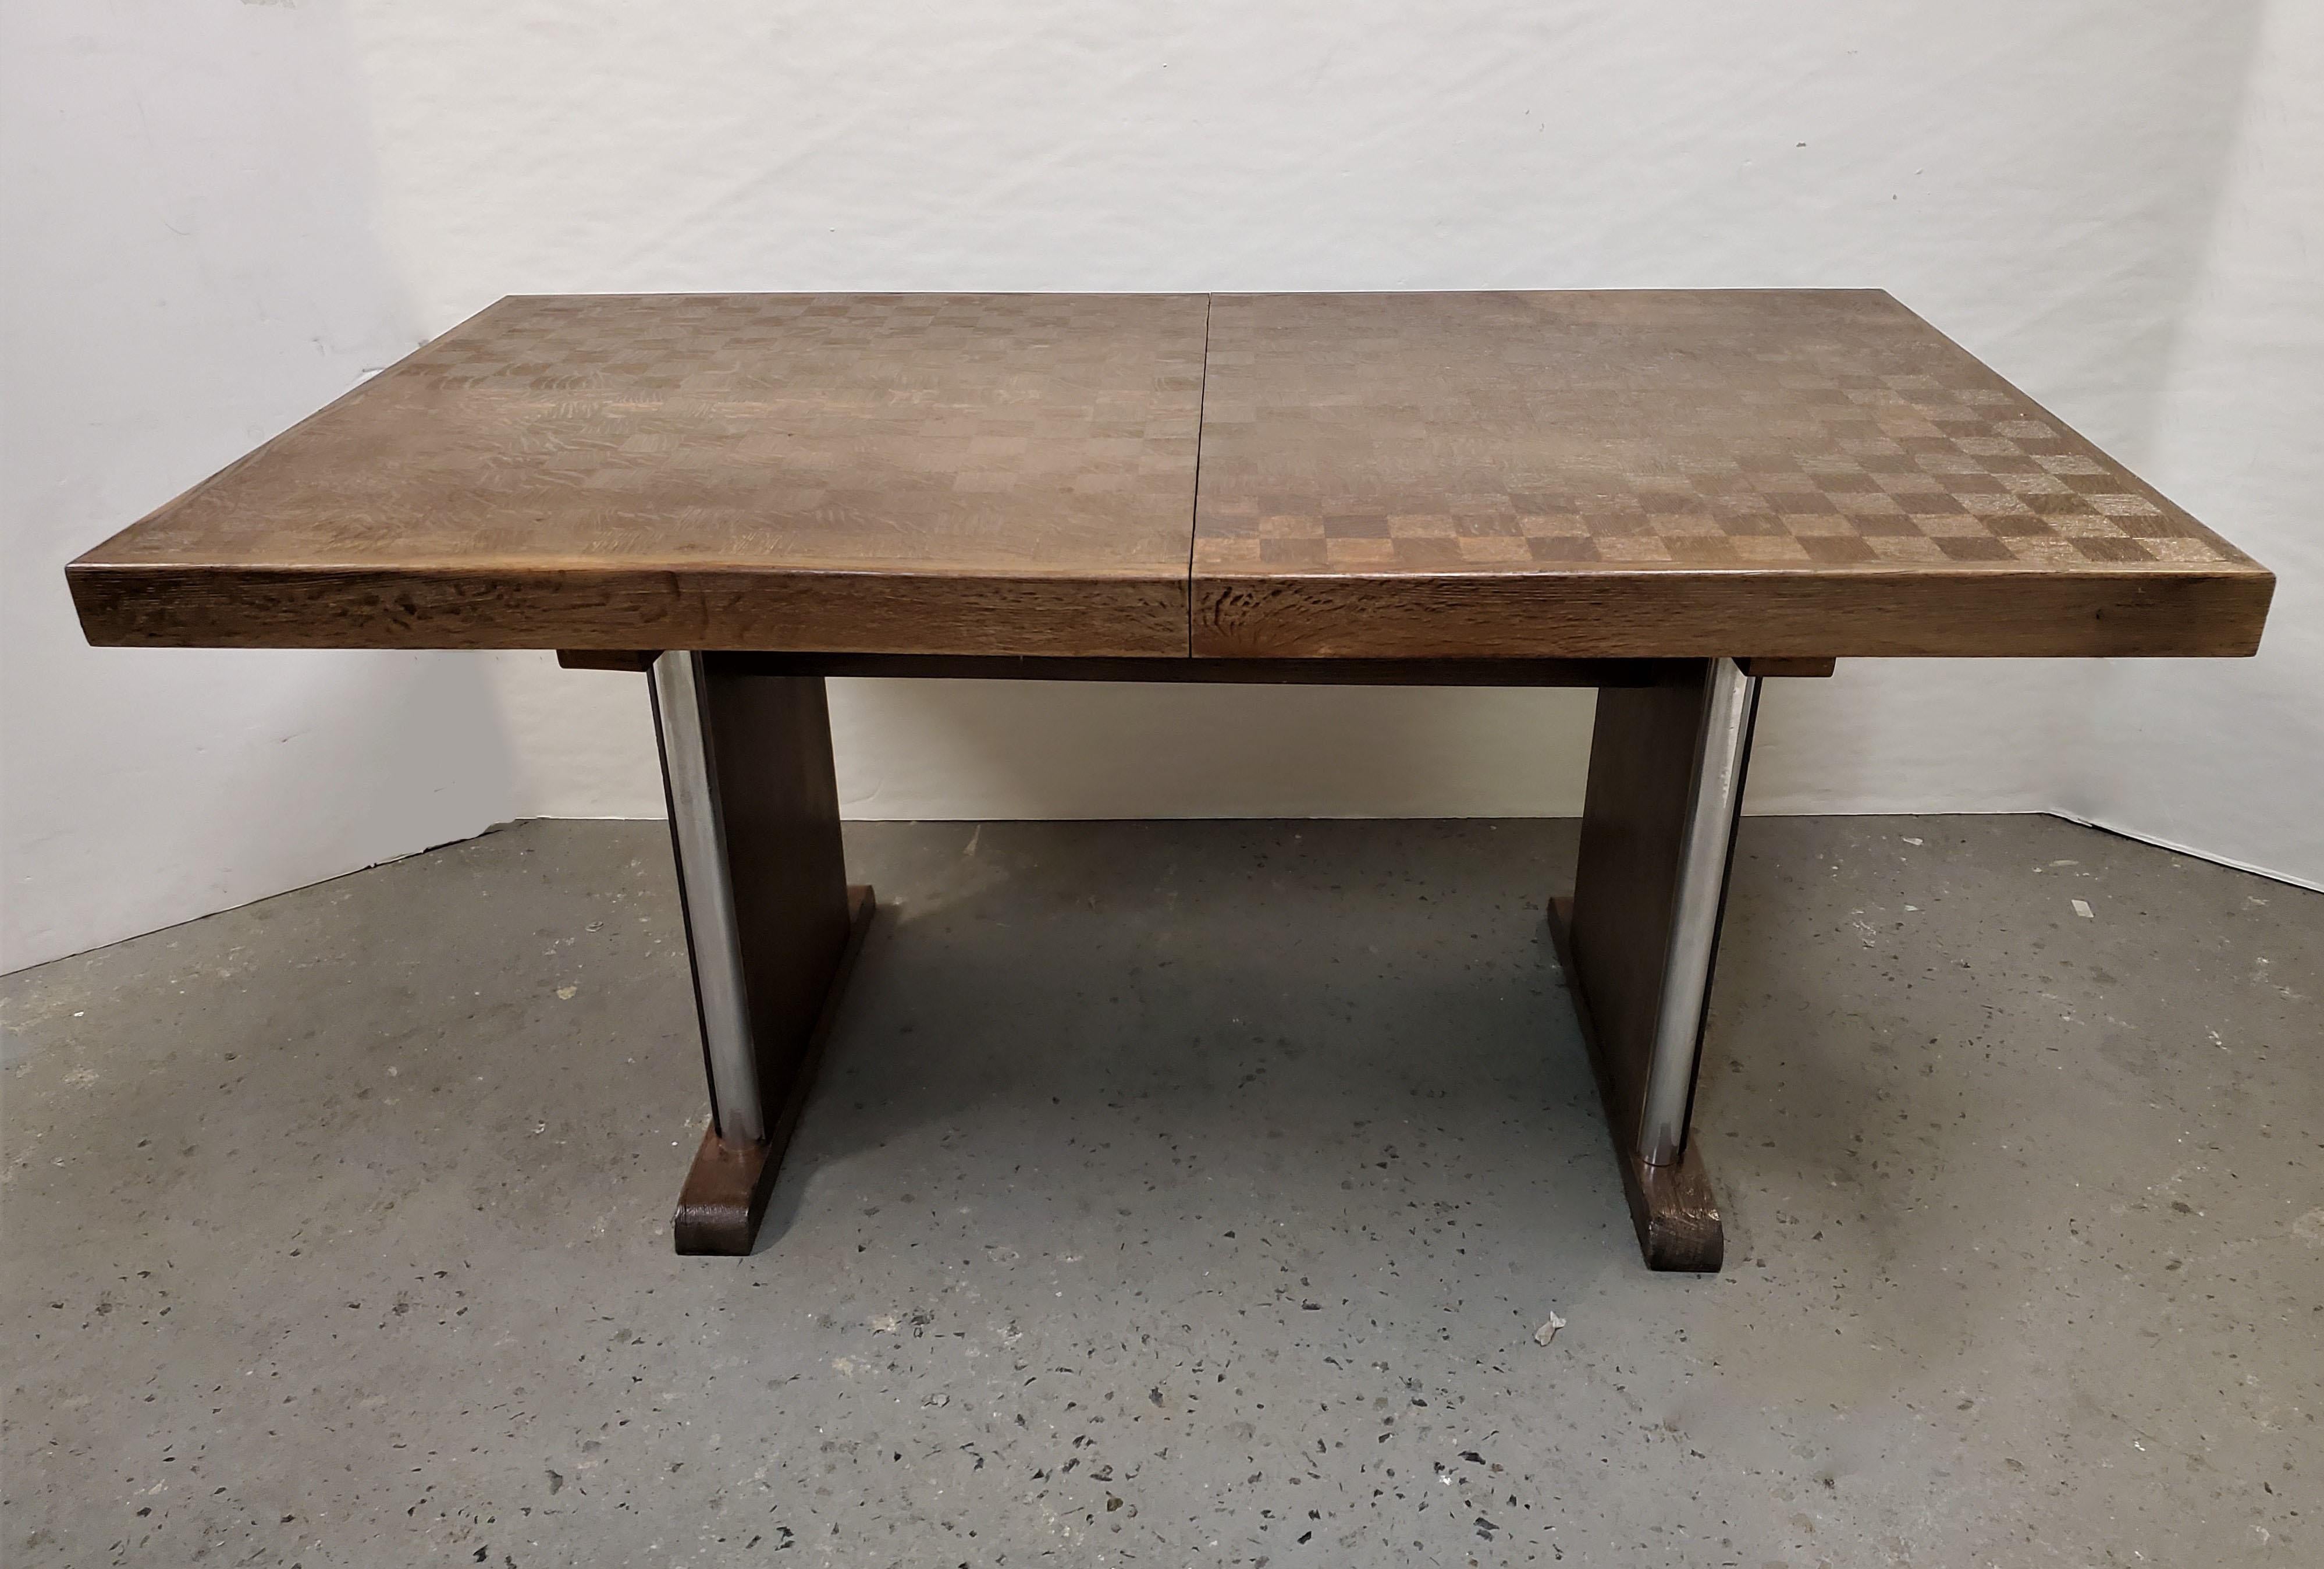 An original Belgian Art Deco dining table featuring a parquetry inlaid table top defined by expert woodworking and a curved double pedestal base with polished aluminum decorative accents. 
Branded 